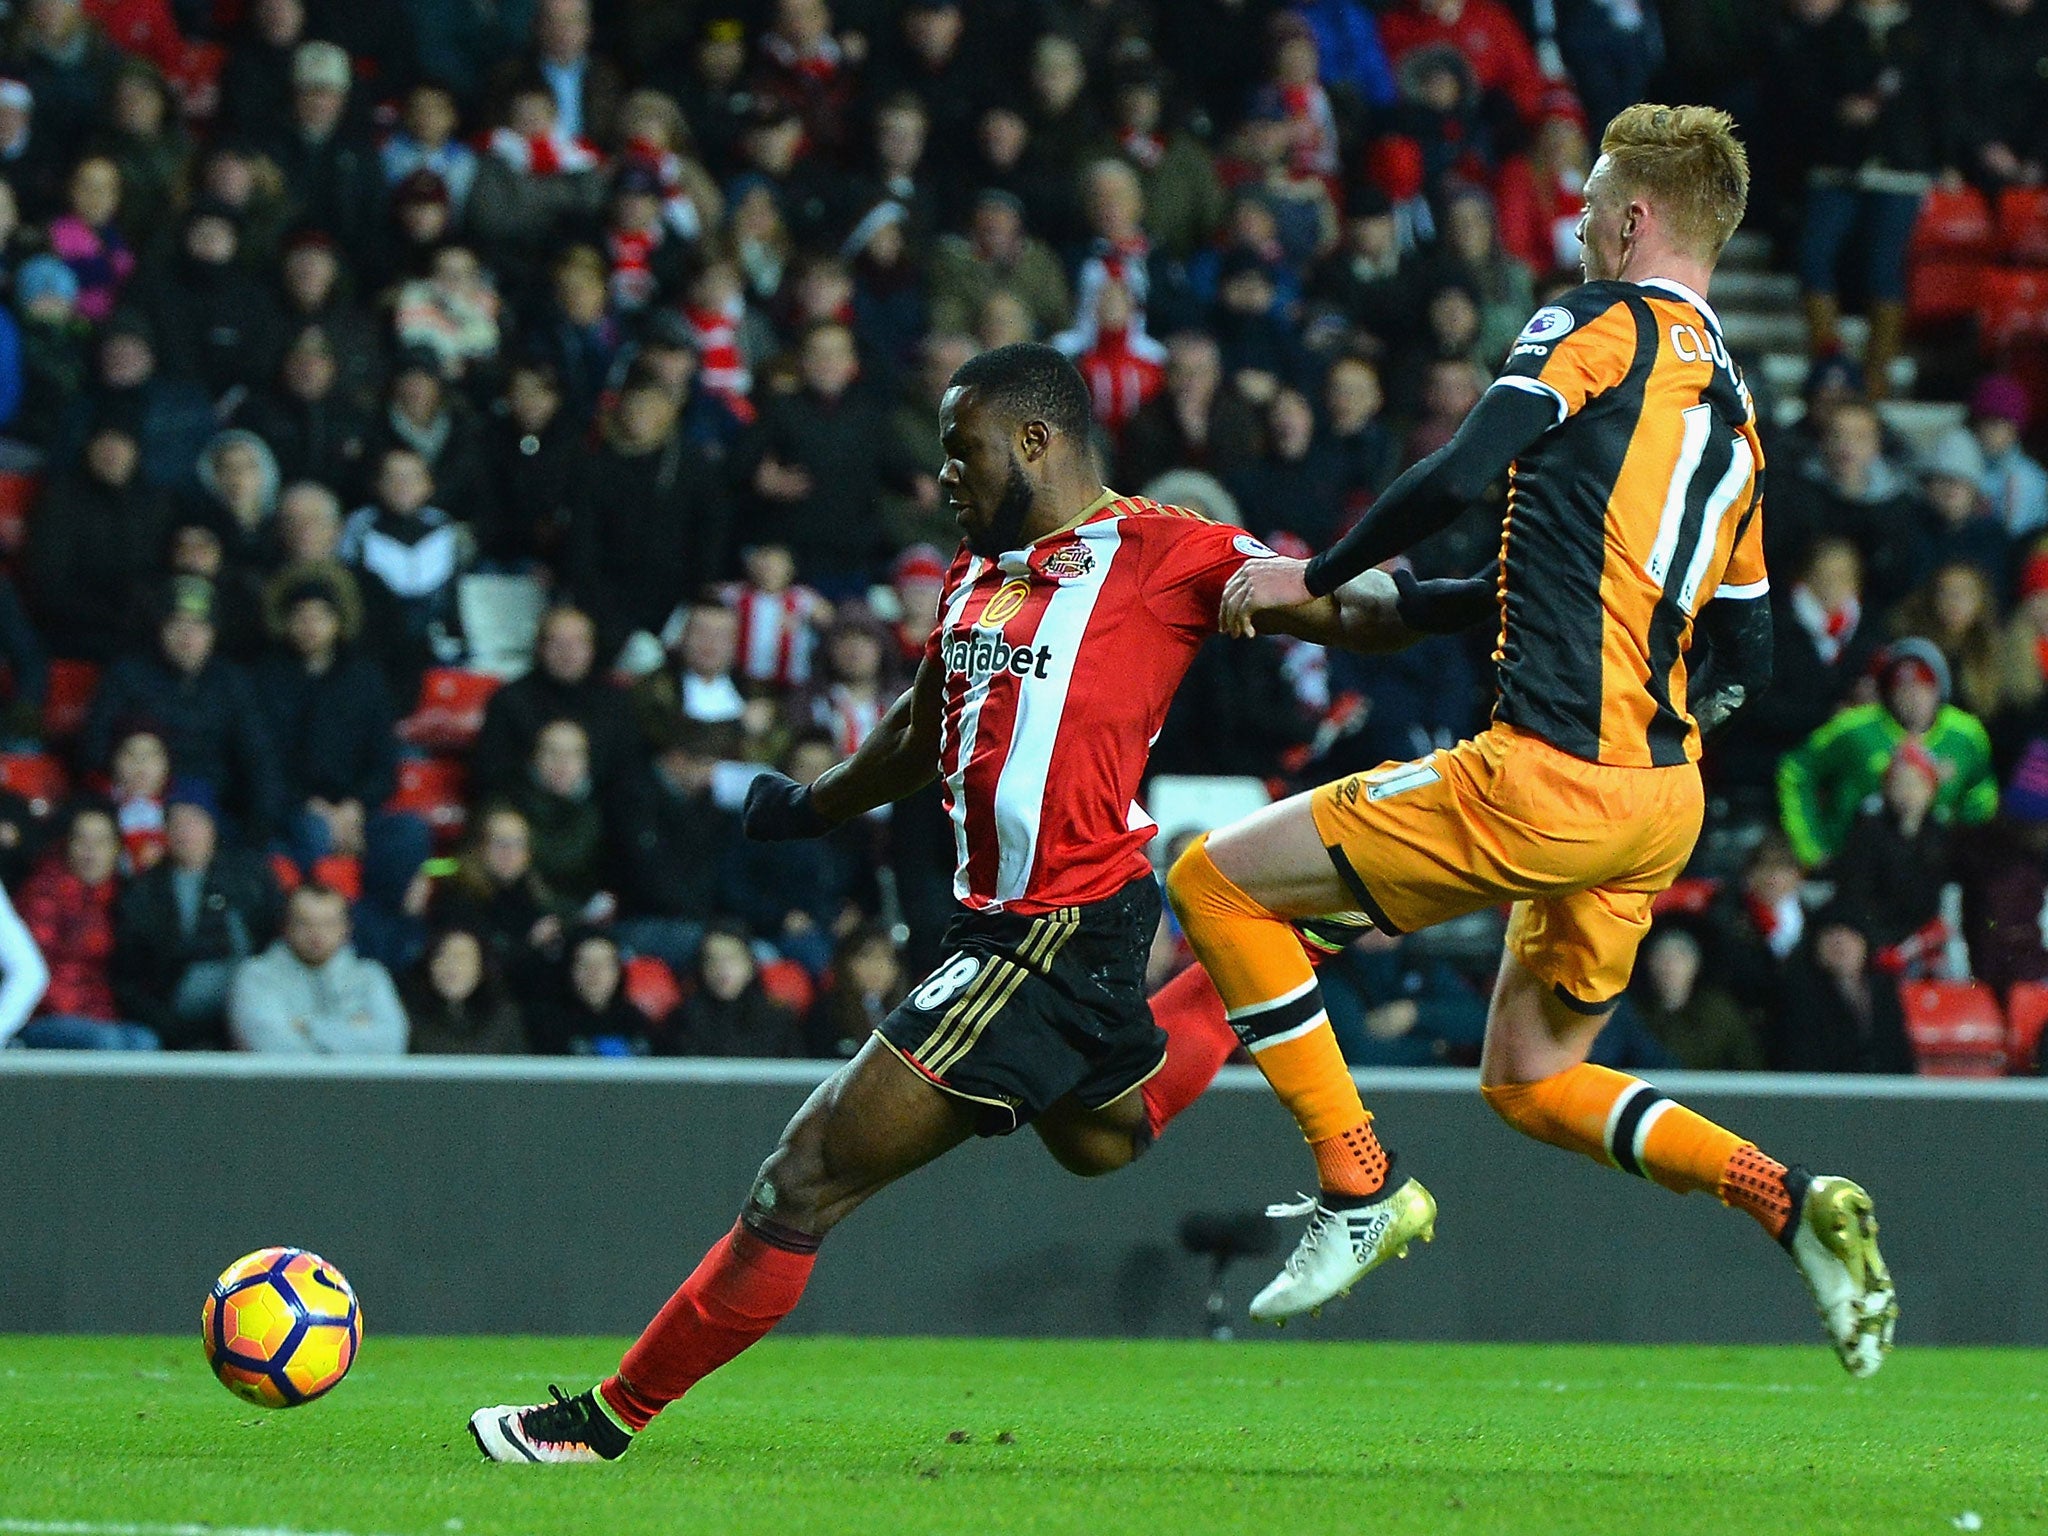 Anichebe winds up to take a shot on goal